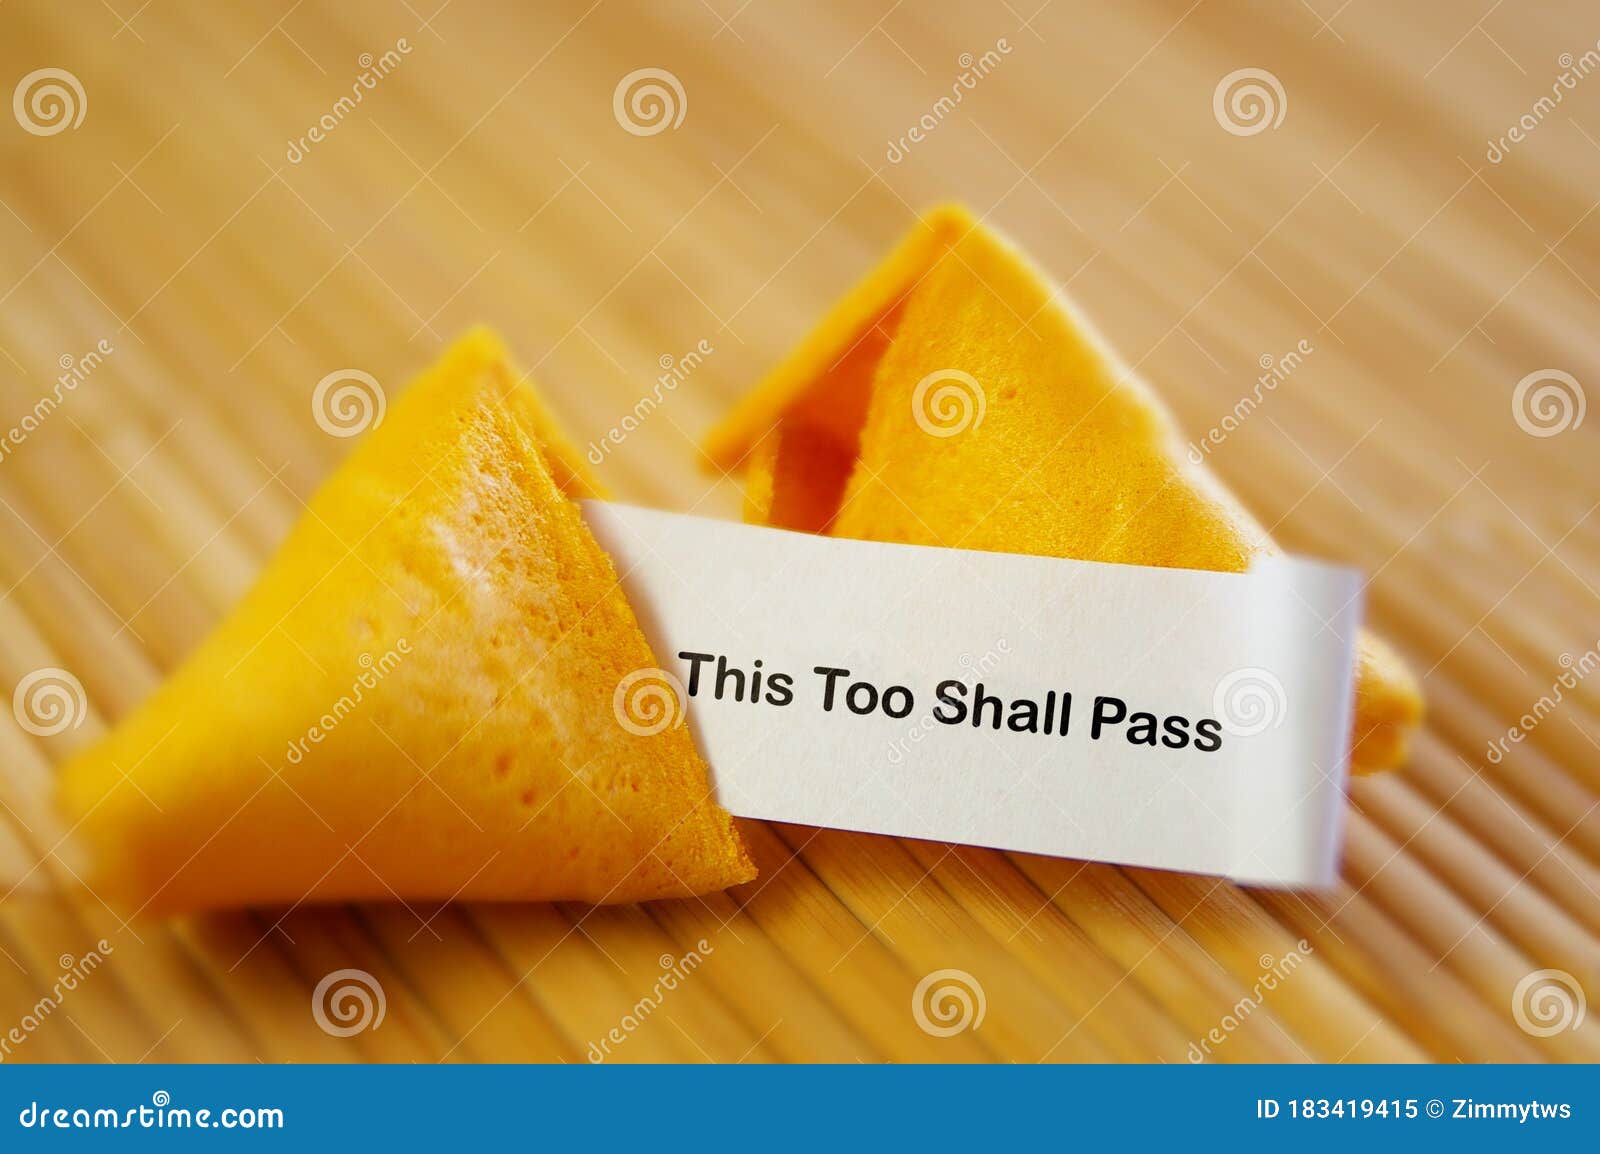 this too shall pass fortune cookie